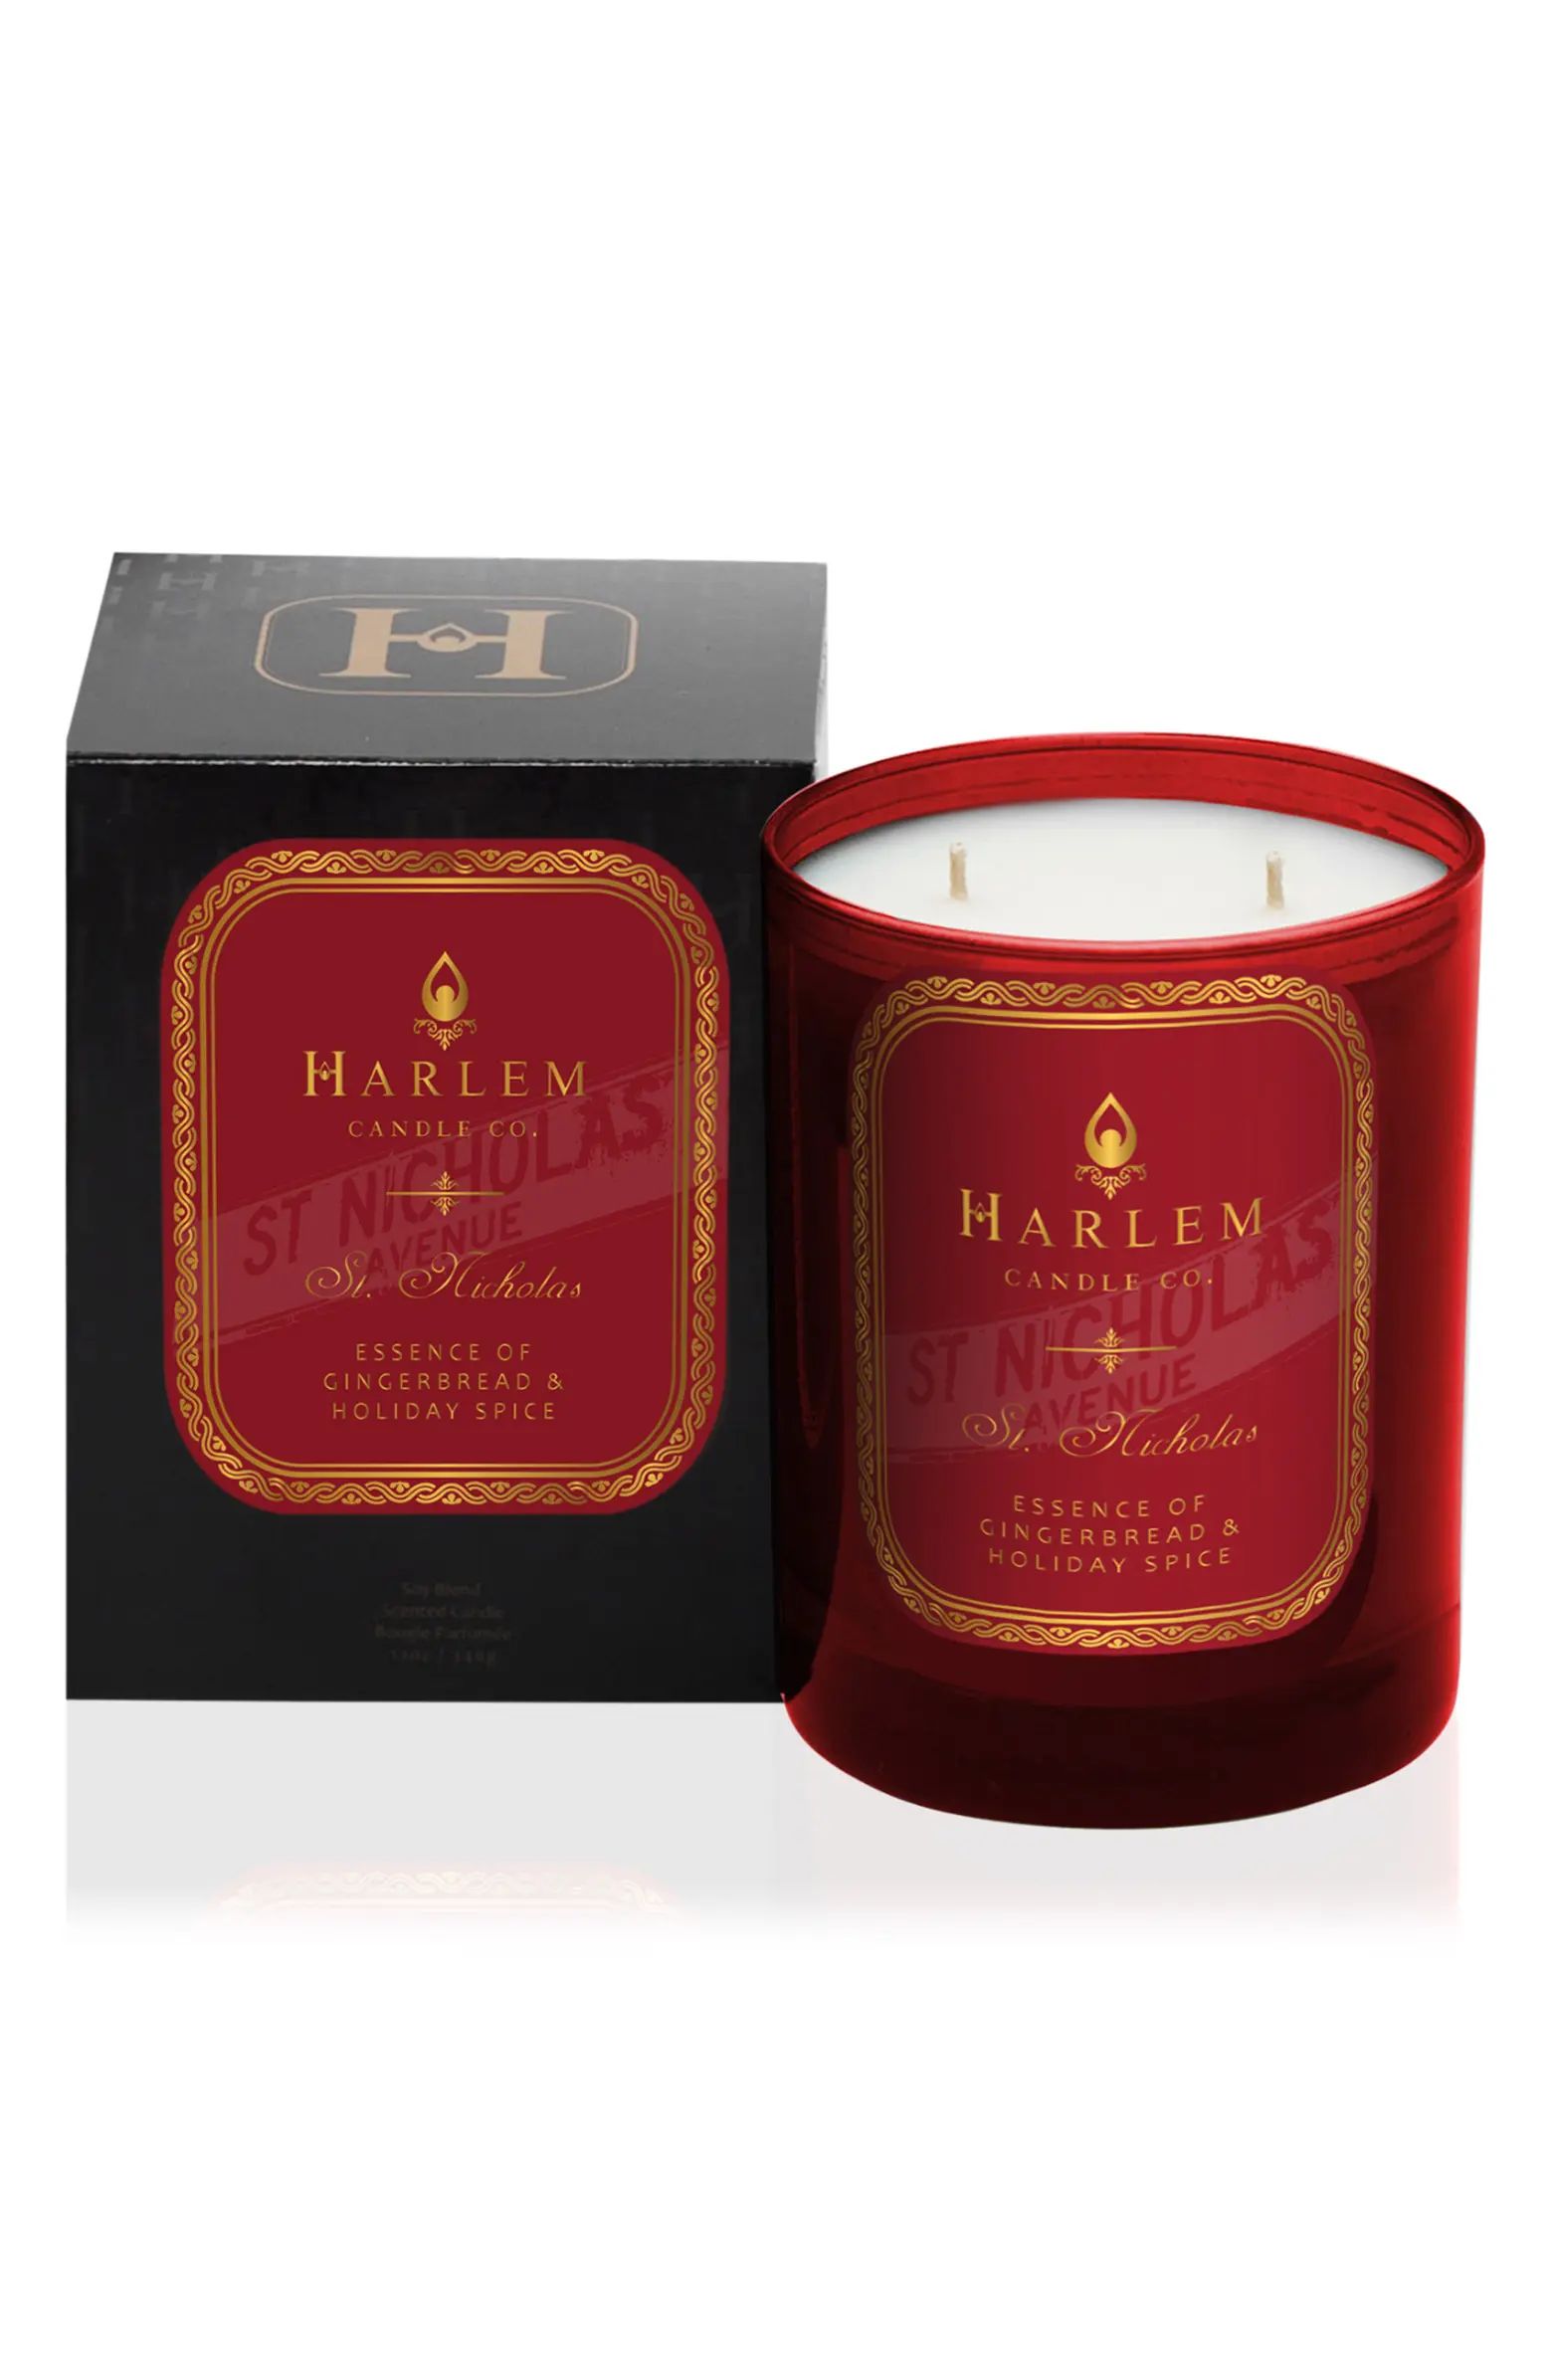 Harlem Candle Co. St. Nicholas Luxury Candle | Nordstrom | Nordstrom